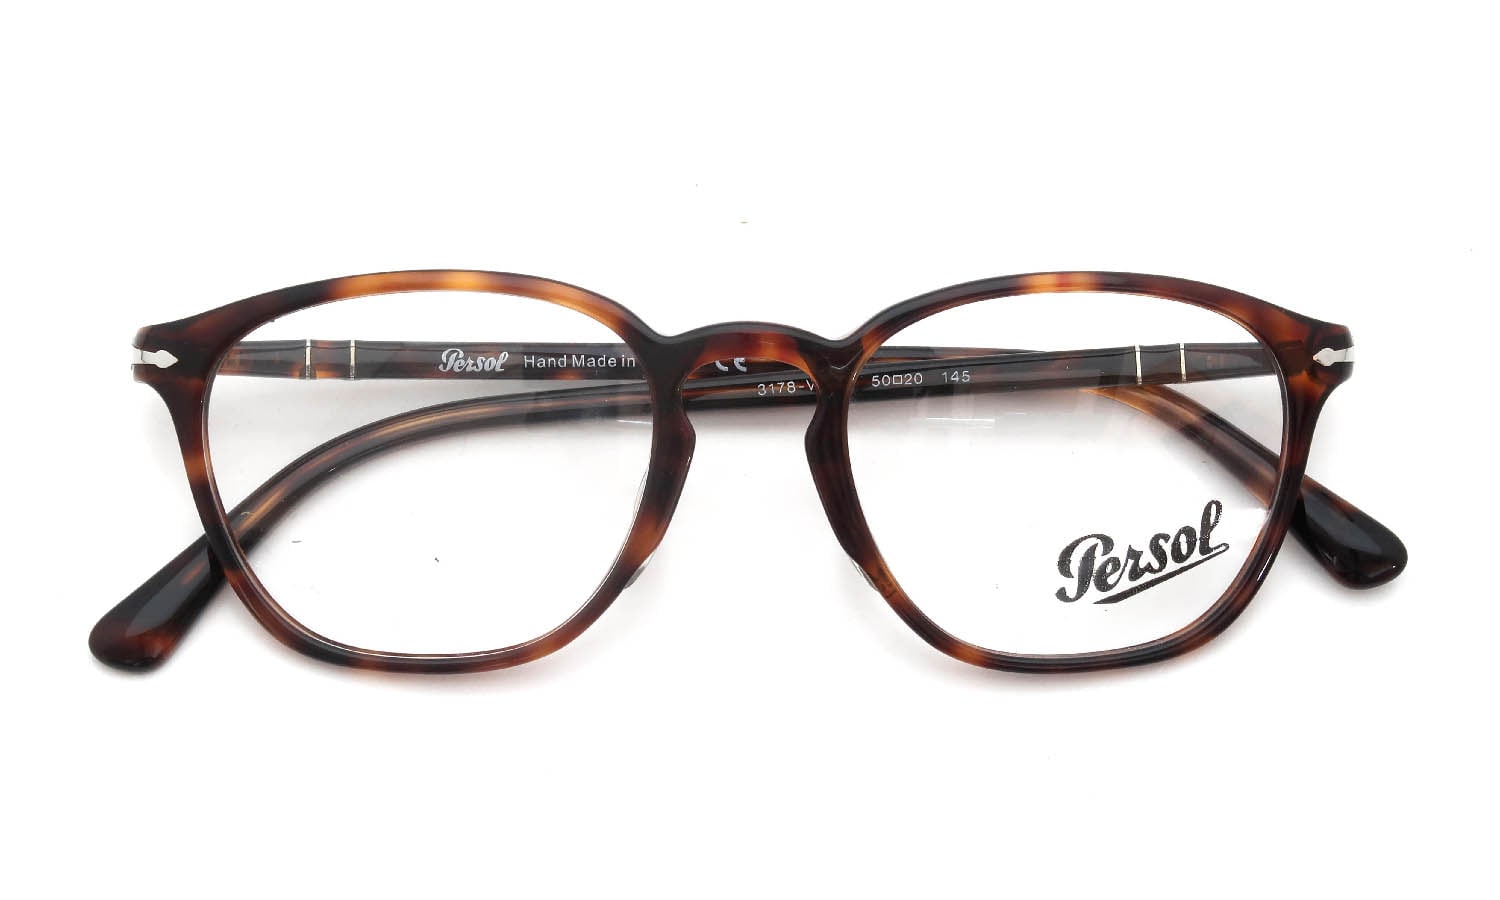 Persol 3178-V 24 50size